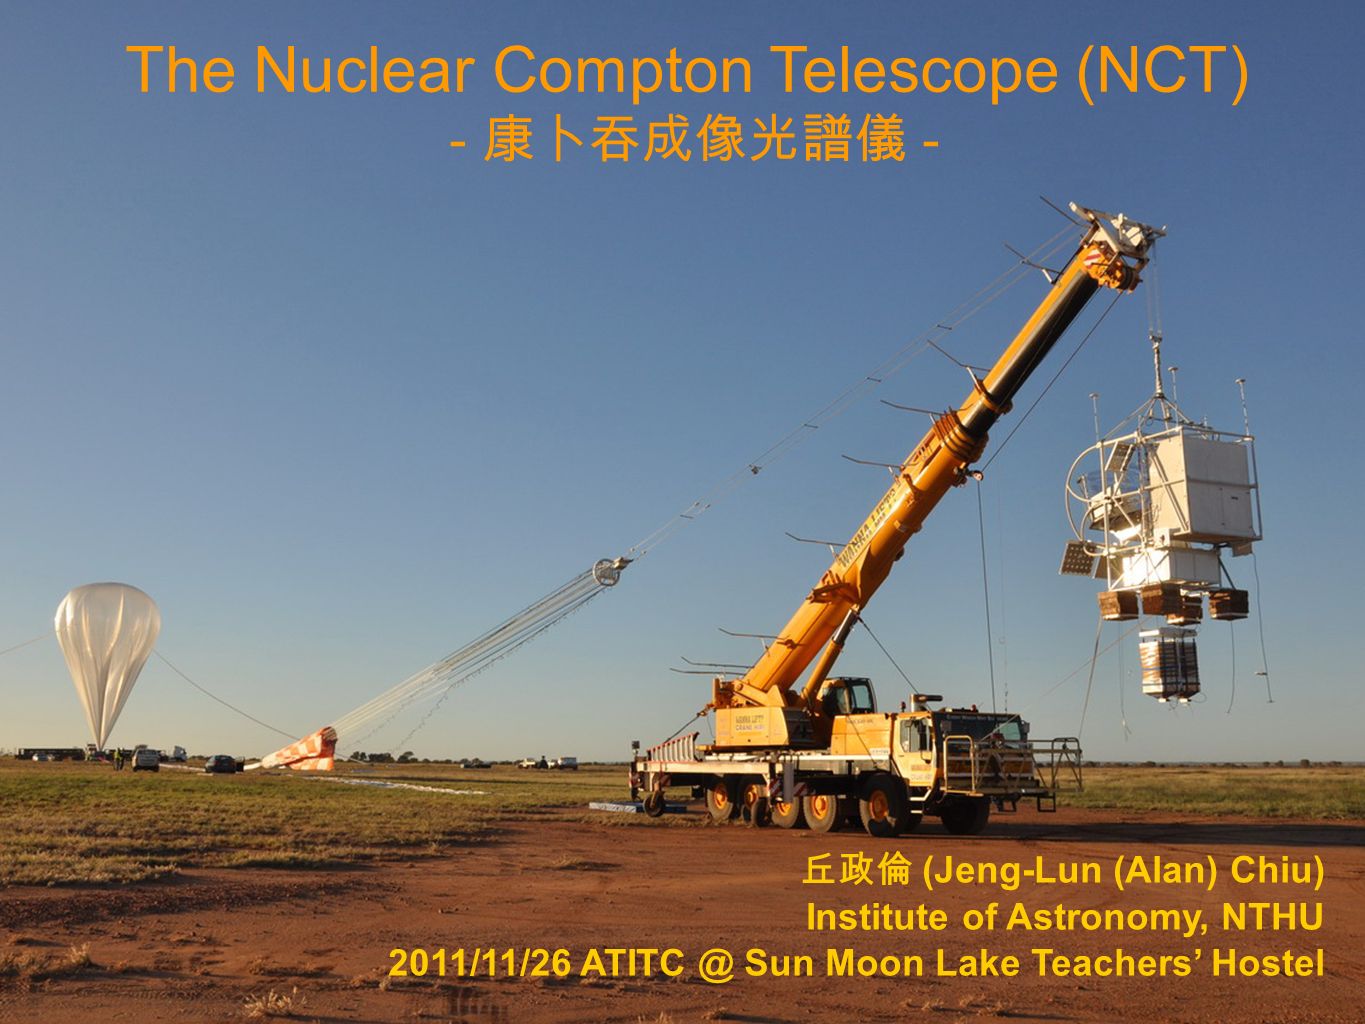 The Nuclear Compton Telescope (NCT) - ppt video online download